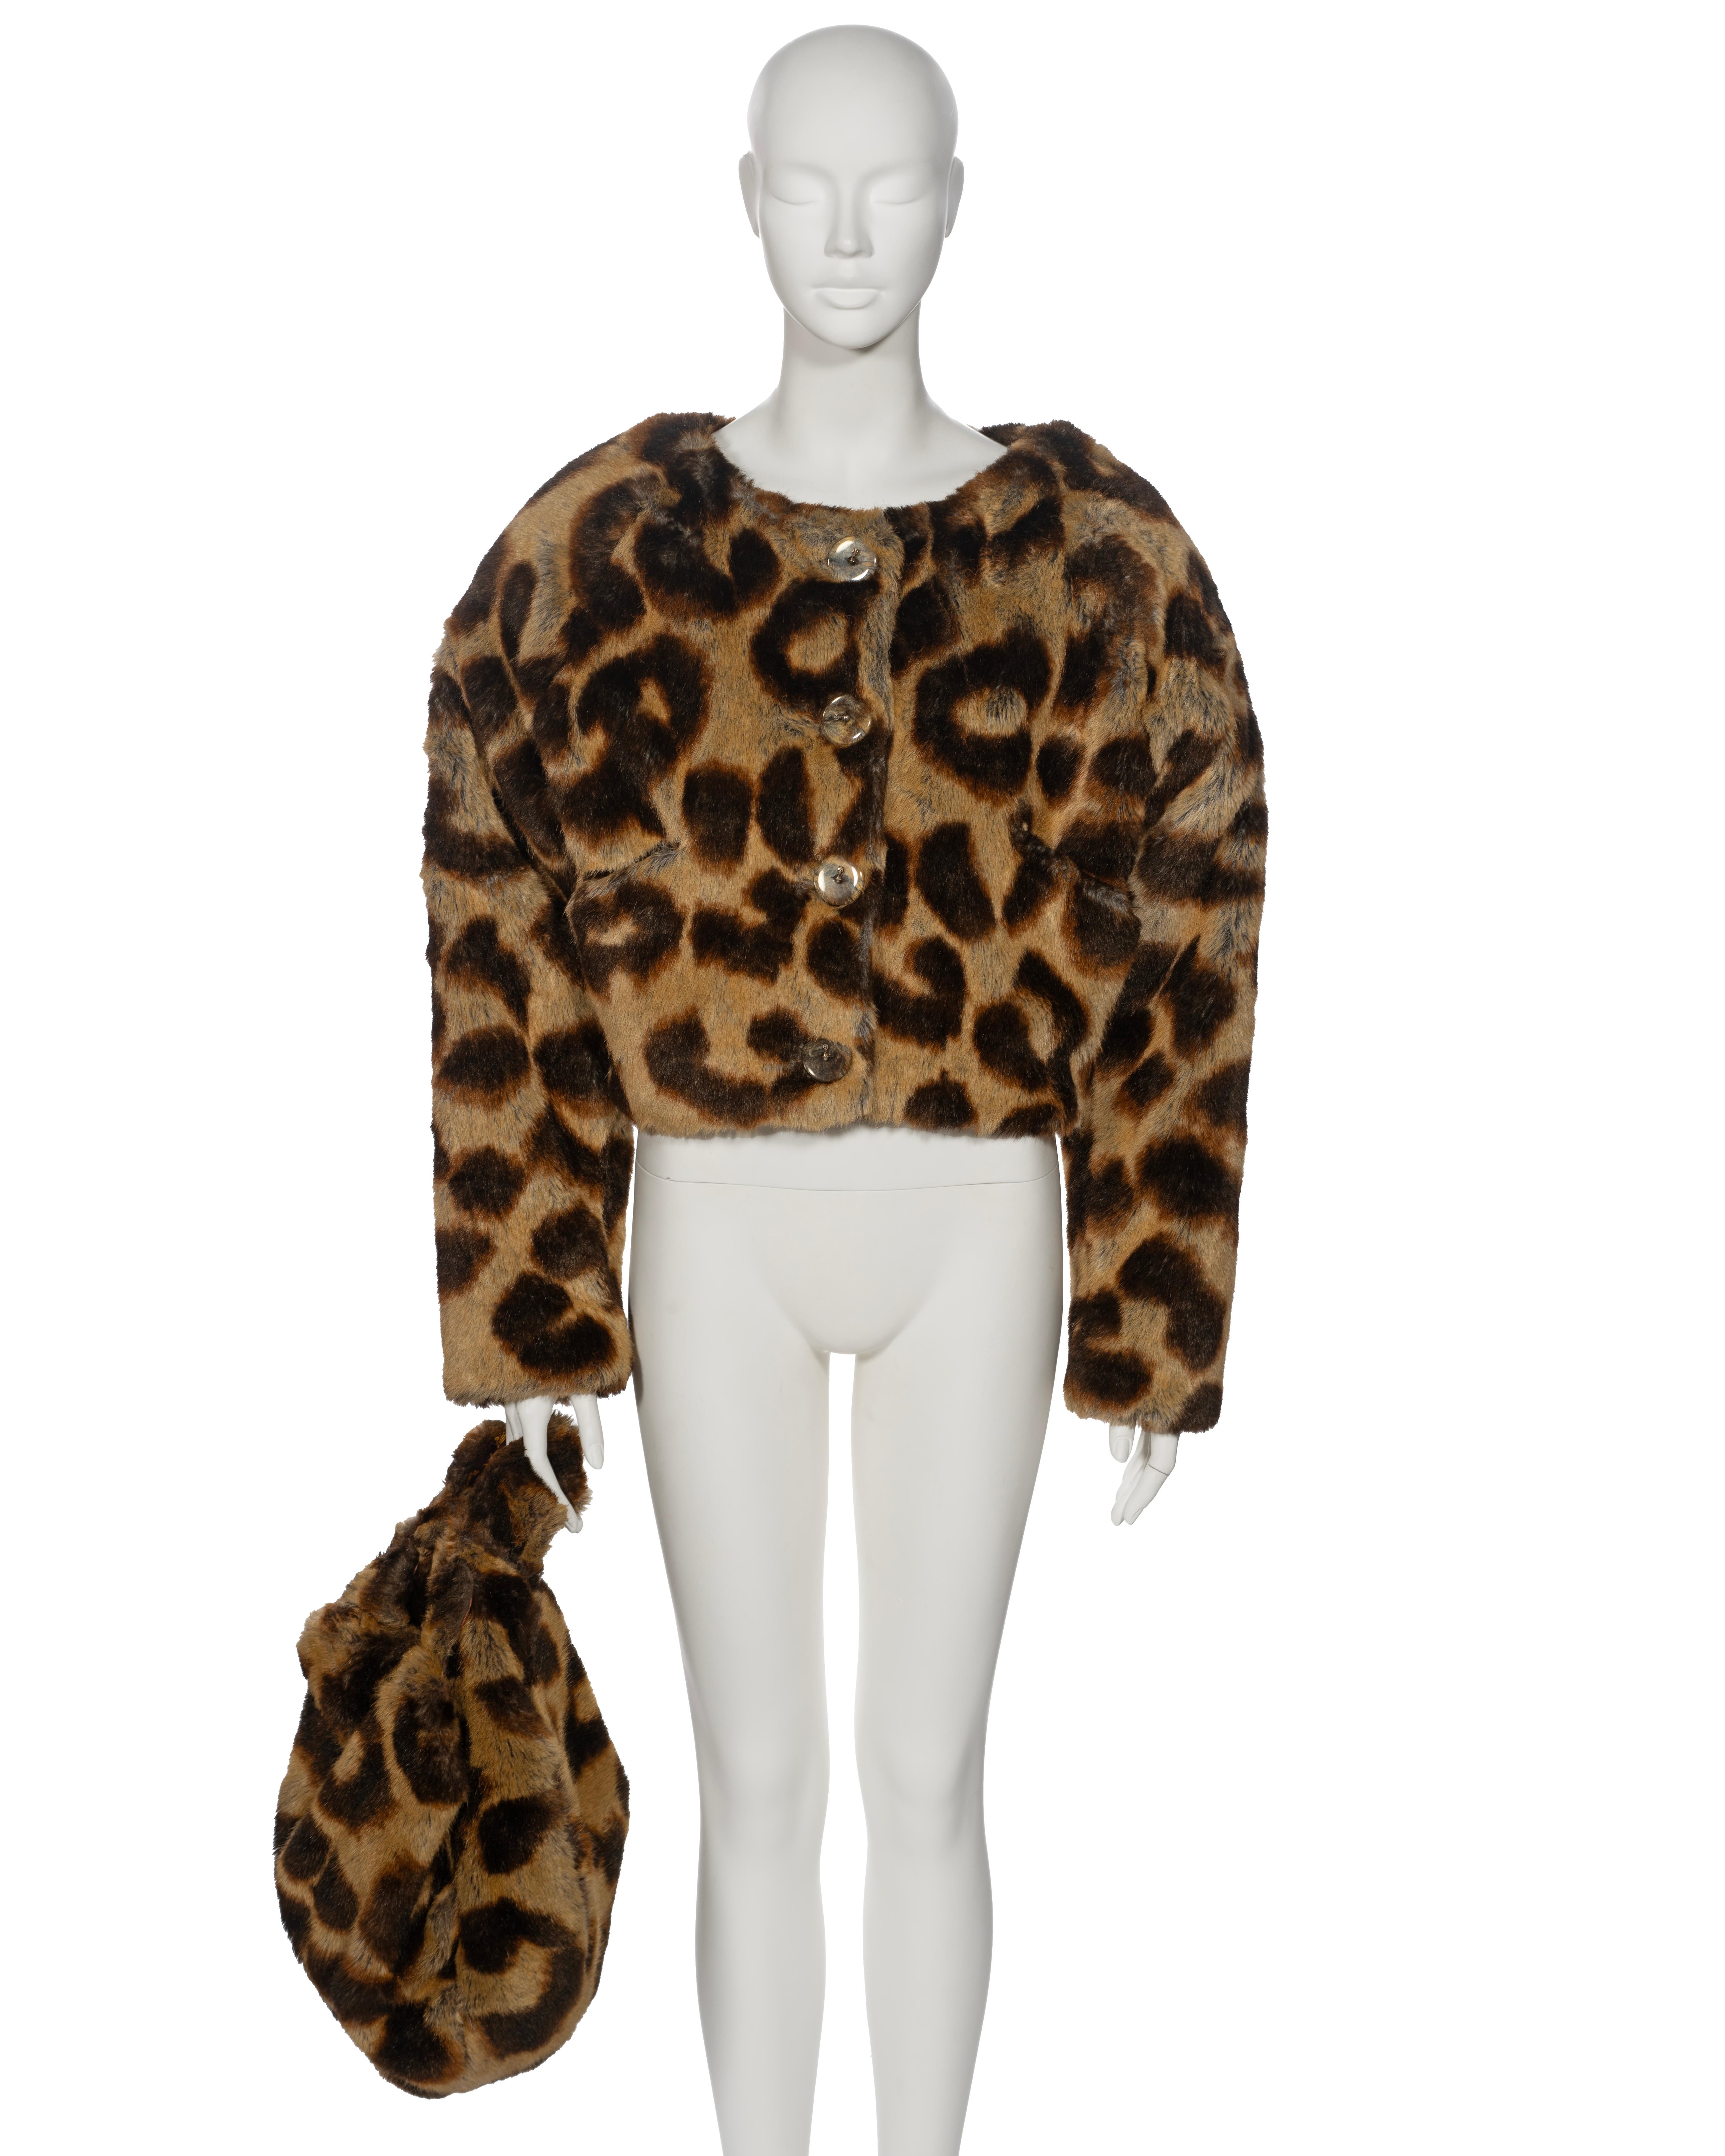 ▪ Archival Vivienne Westwood Faux Fur Jacket and Bag Set
▪ Always on Camera Collection, Fall-Winter 1992
▪ Sold by One of a Kind Archive
▪ Outsized leopard print on faux fur
▪ Rounded padded shoulder
▪ Clear resin button front with metal orb